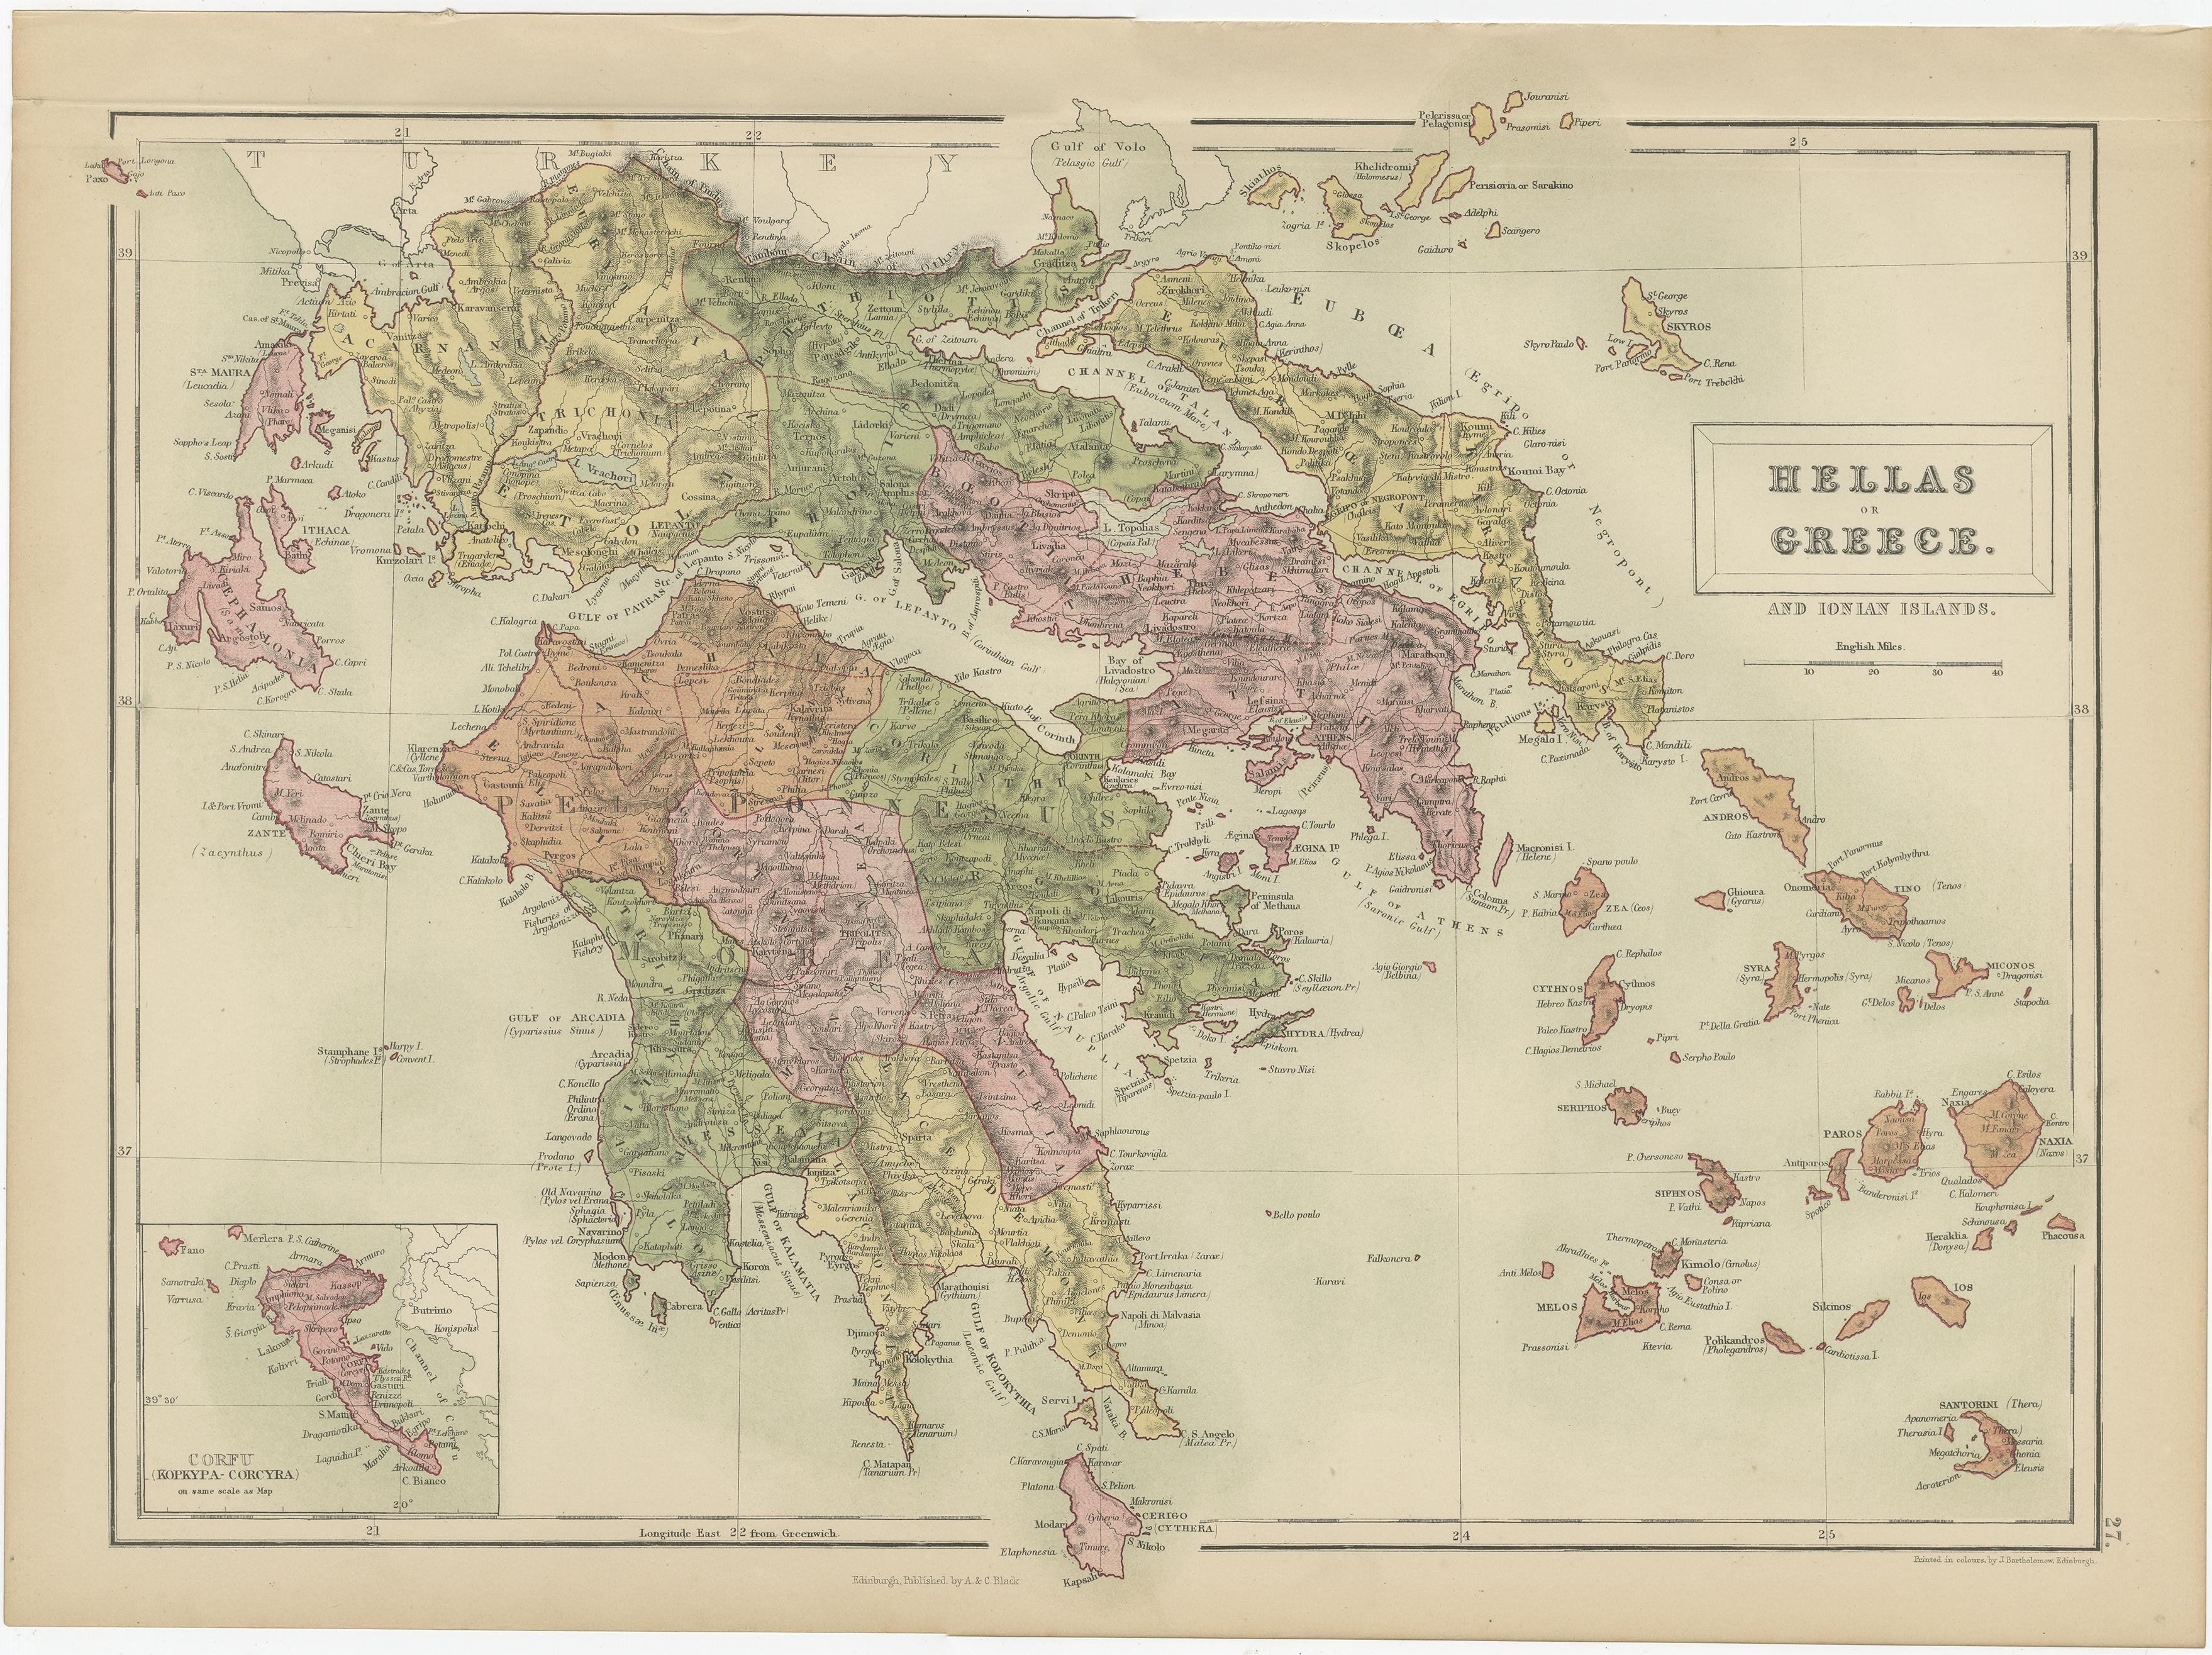 Antique map titled 'Hellas or Greece'. Original antique map of Greece and Ionian Islands with inset map of Corfu. This map originates from ‘Black's General Atlas of The World’. Published by A & C. Black, 1870.